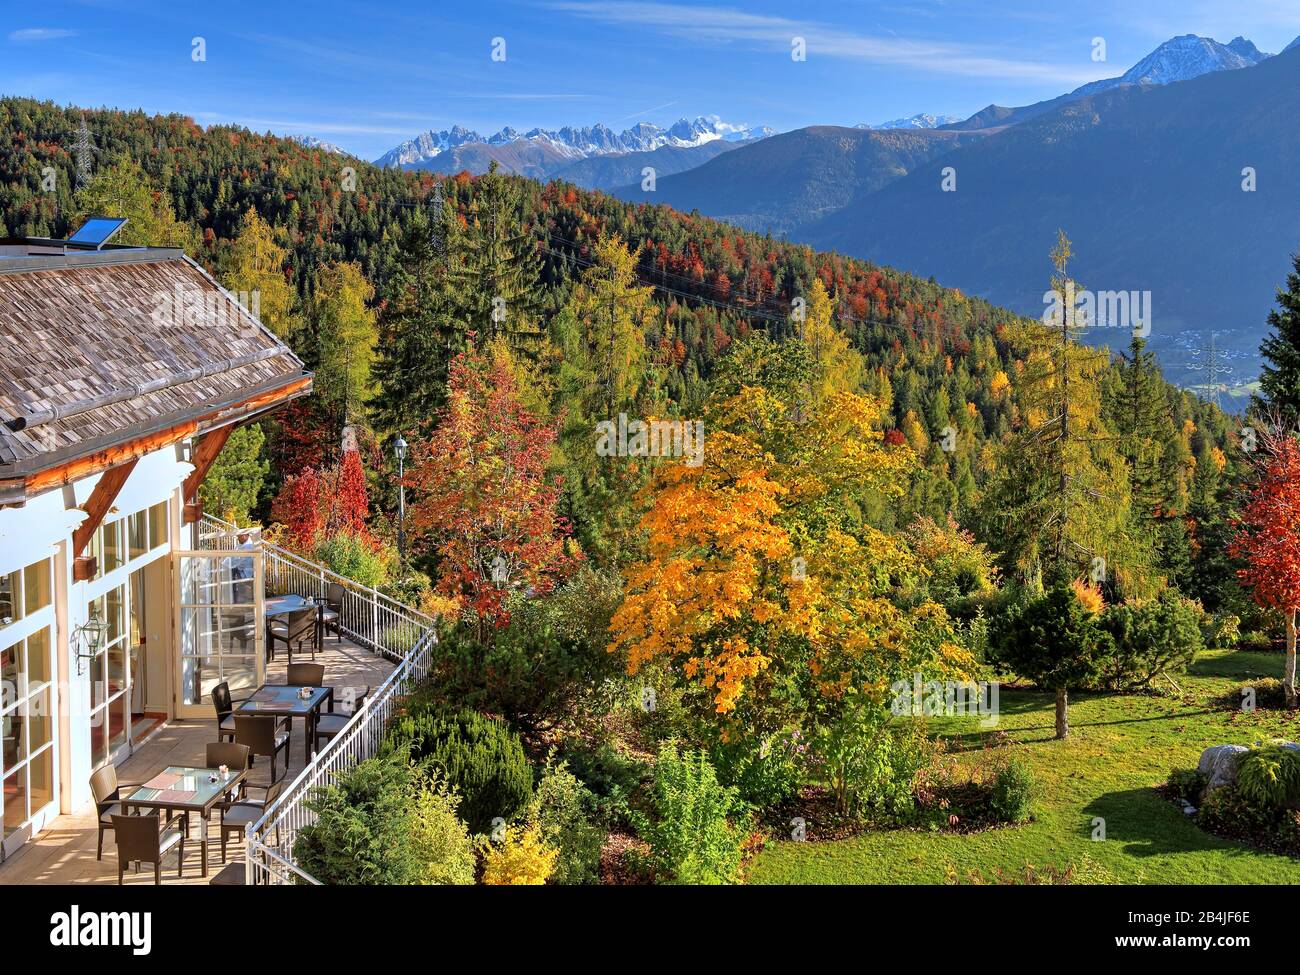 Restaurant terrace and garden of the Interalpenhotel with a view of the Inn Valley and the Kalkkögel (2804m), Telfs, Tyrol, Austria Stock Photo